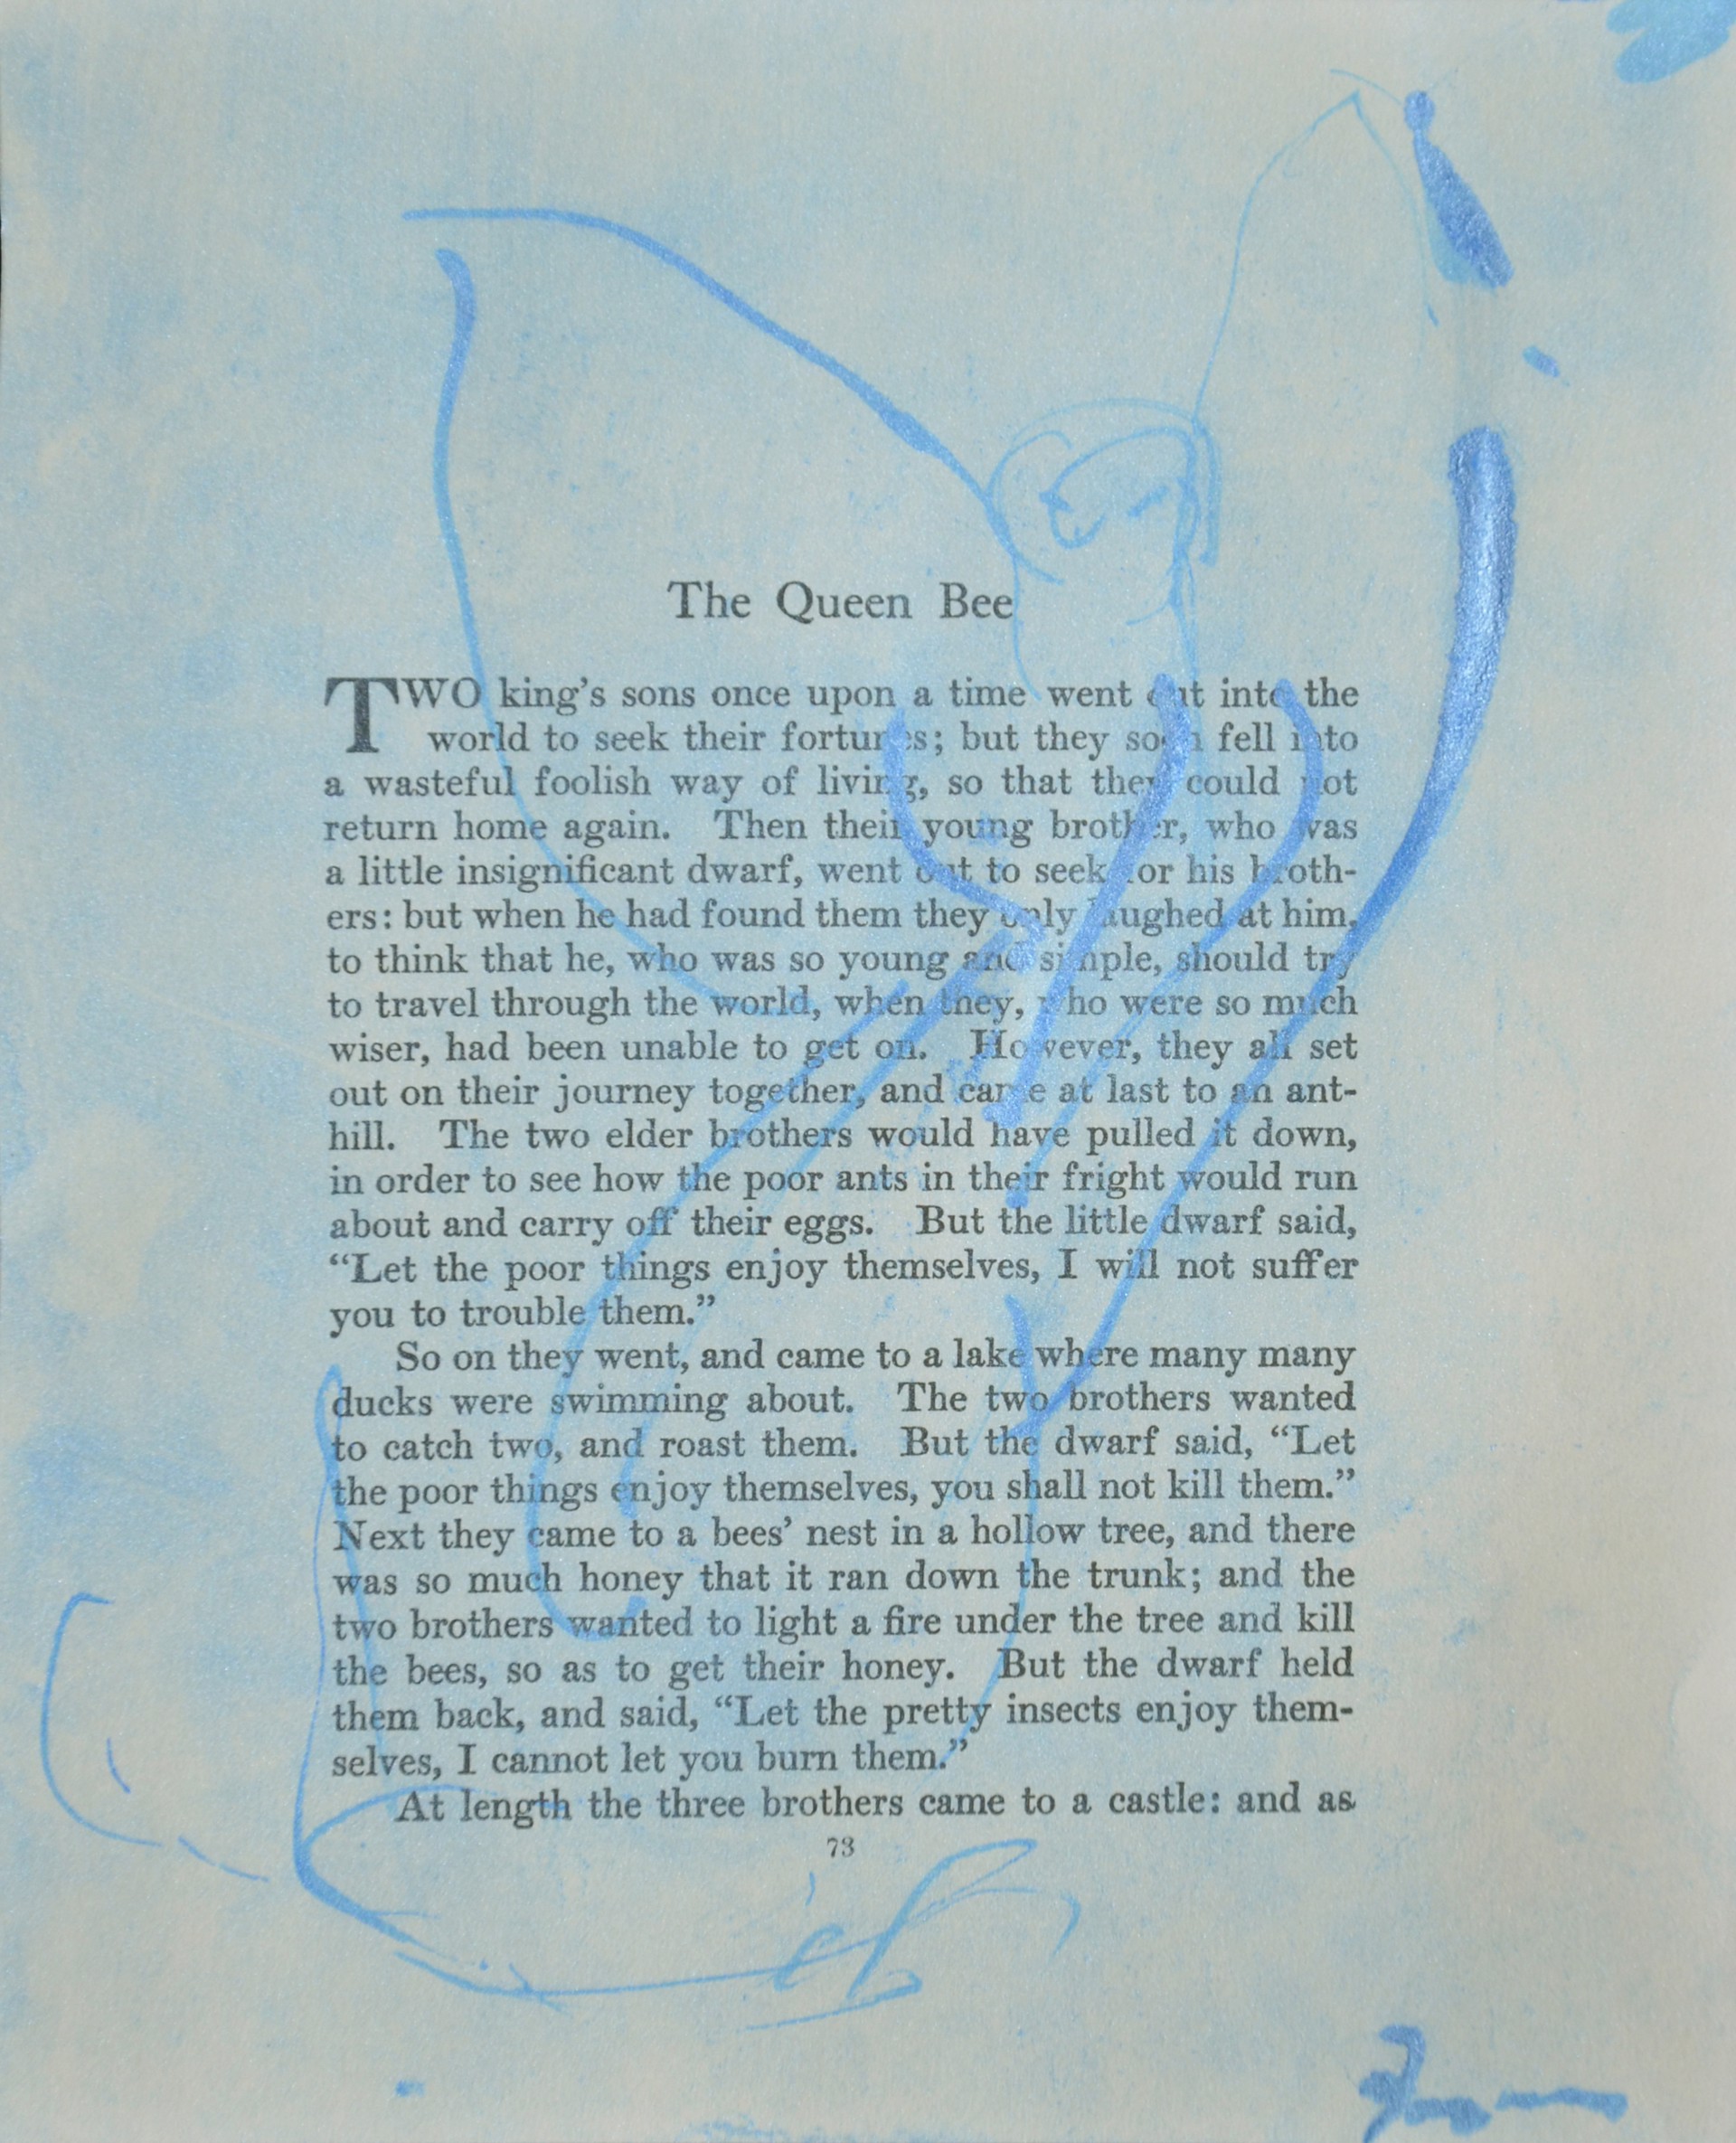 The Queen Bee by Gail Foster